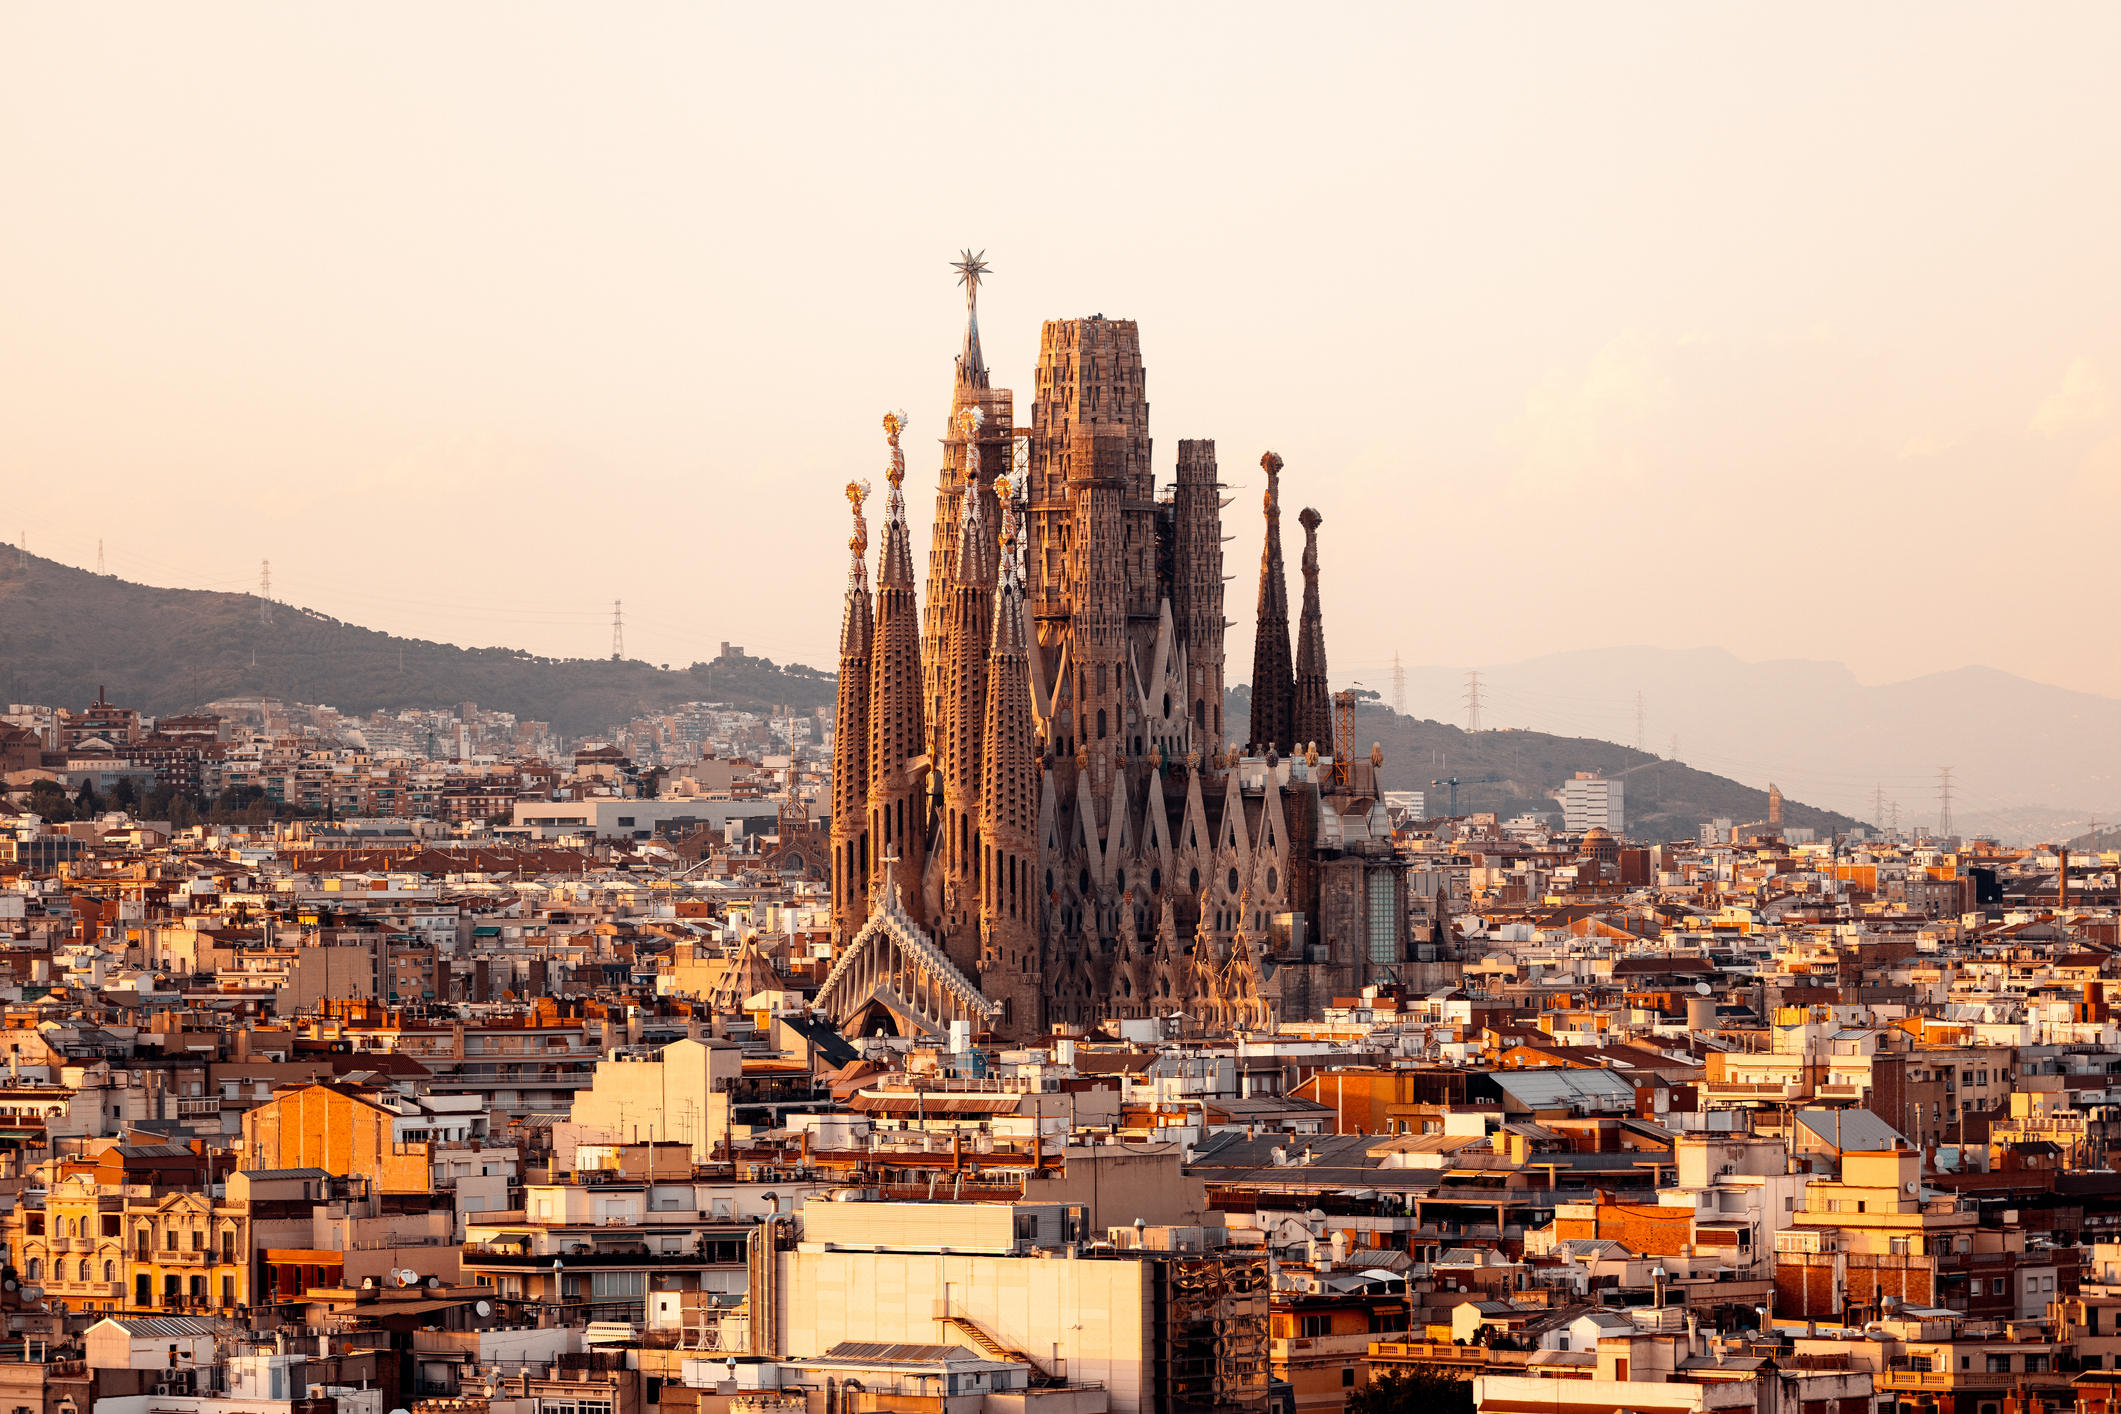 Sagrada Familia cathedral towers over Barcelona&#x27;s cityscape at sunset